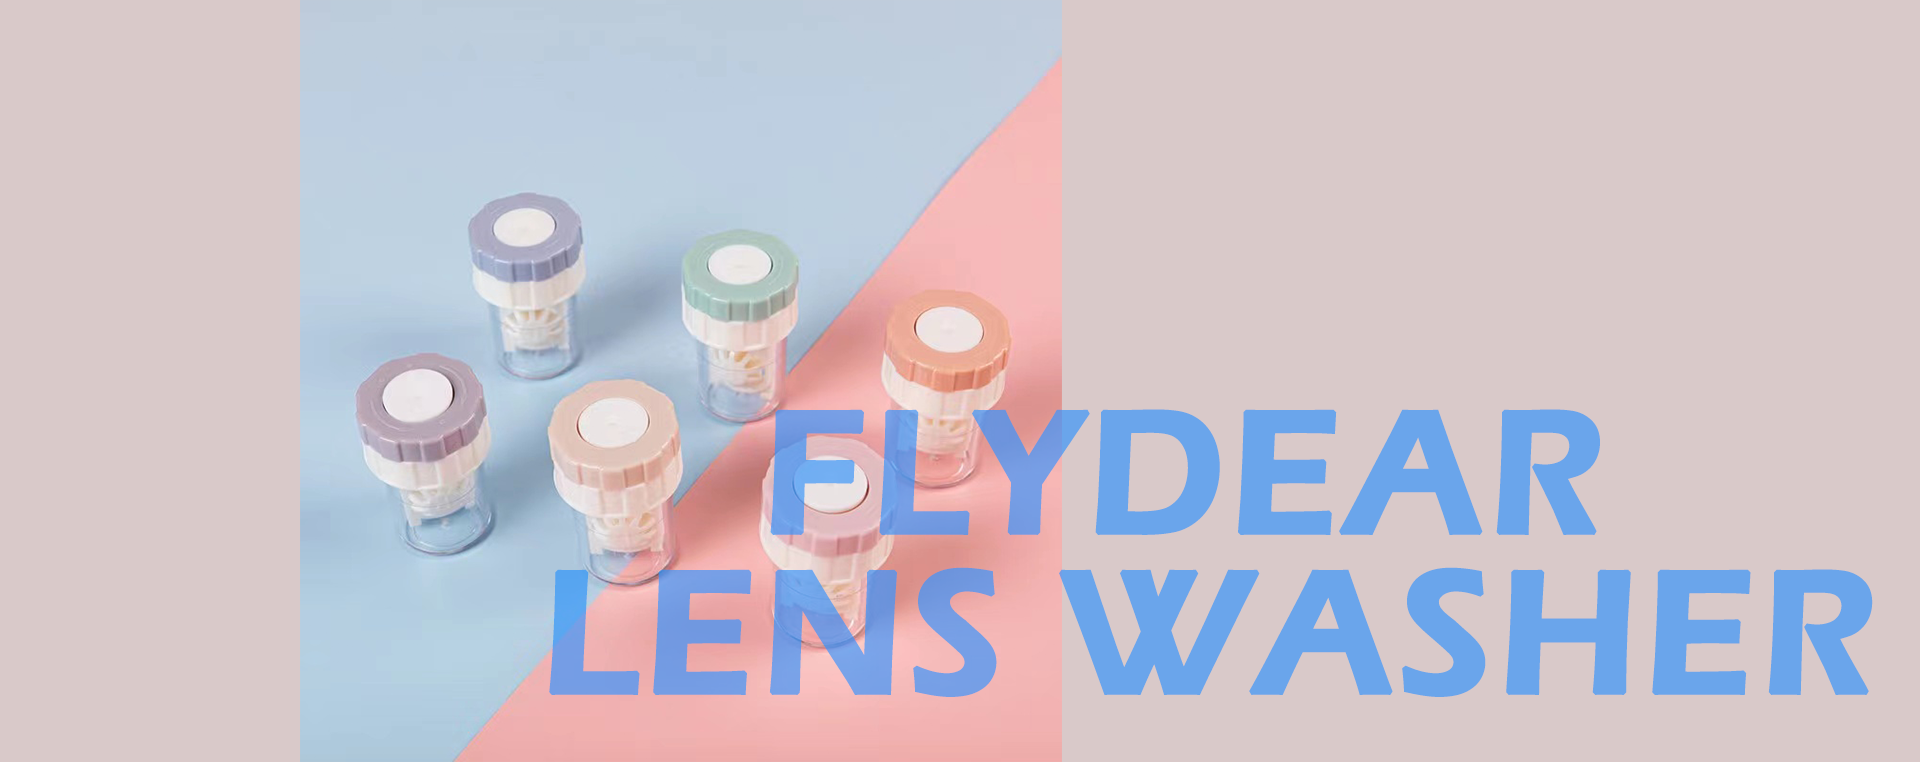 FlyDear Colored Contacts Lens Washer